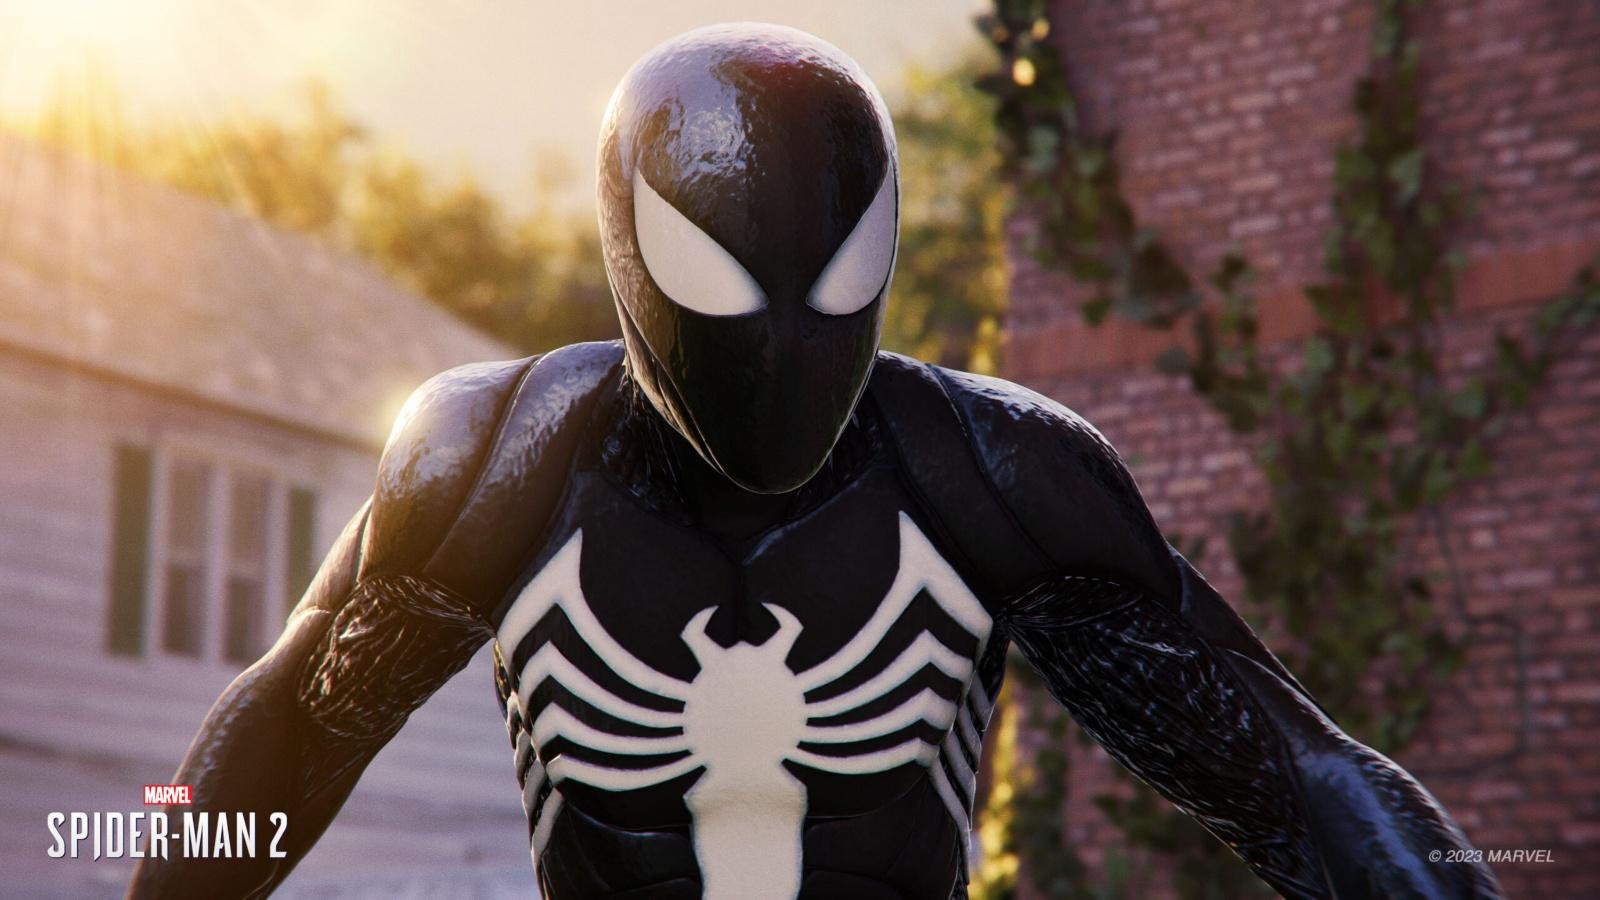 A screenshot from the game Spider-Man 2